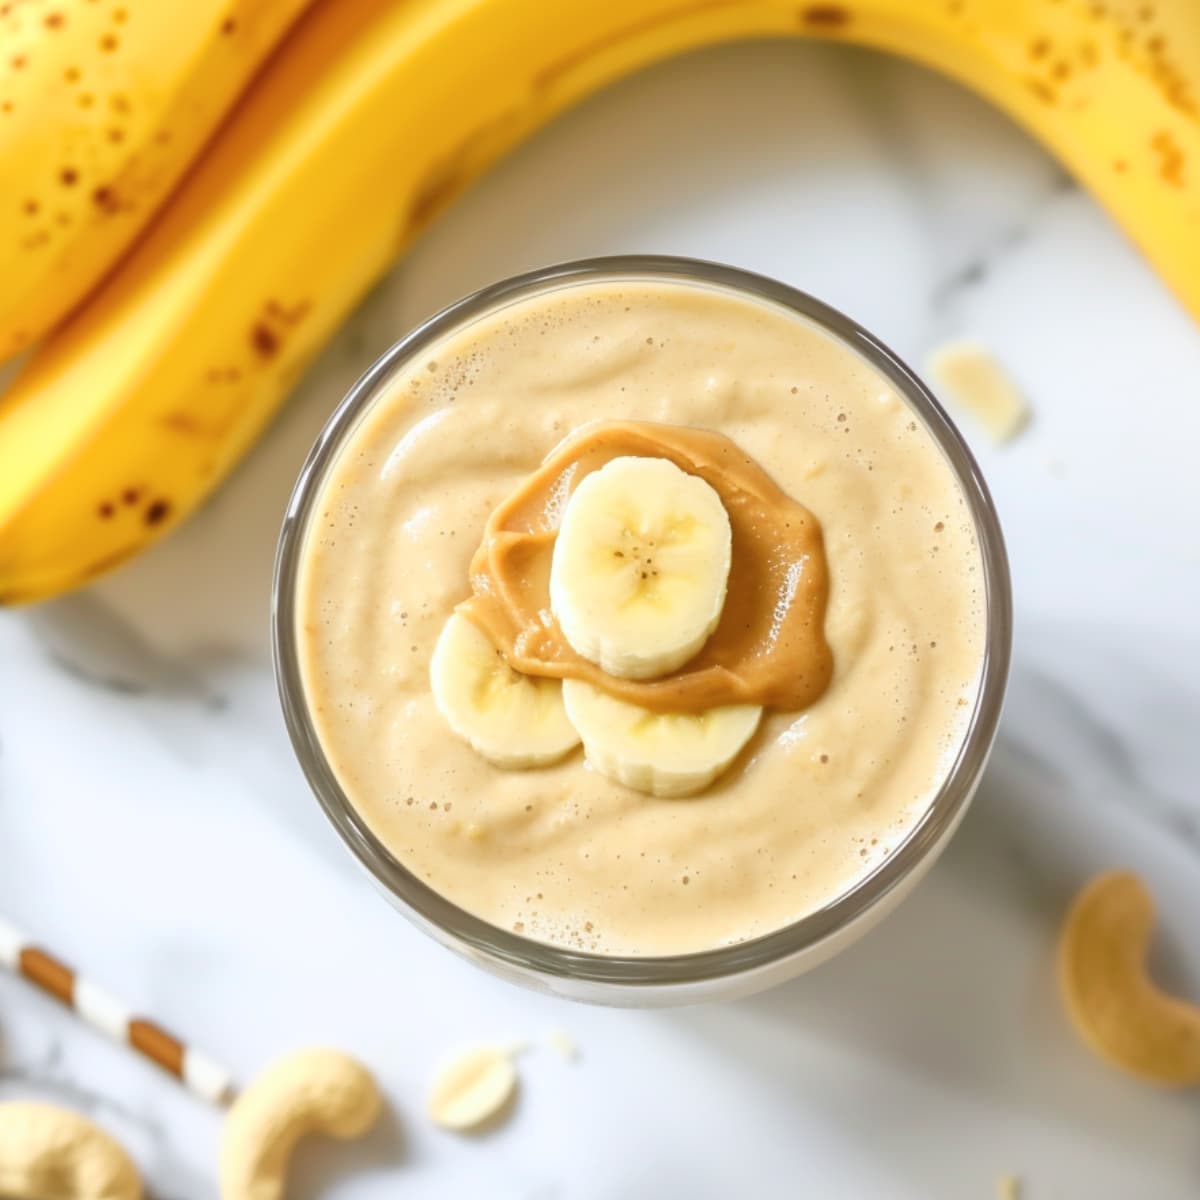 Refreshing homemade peanut butter banana smoothie, top view